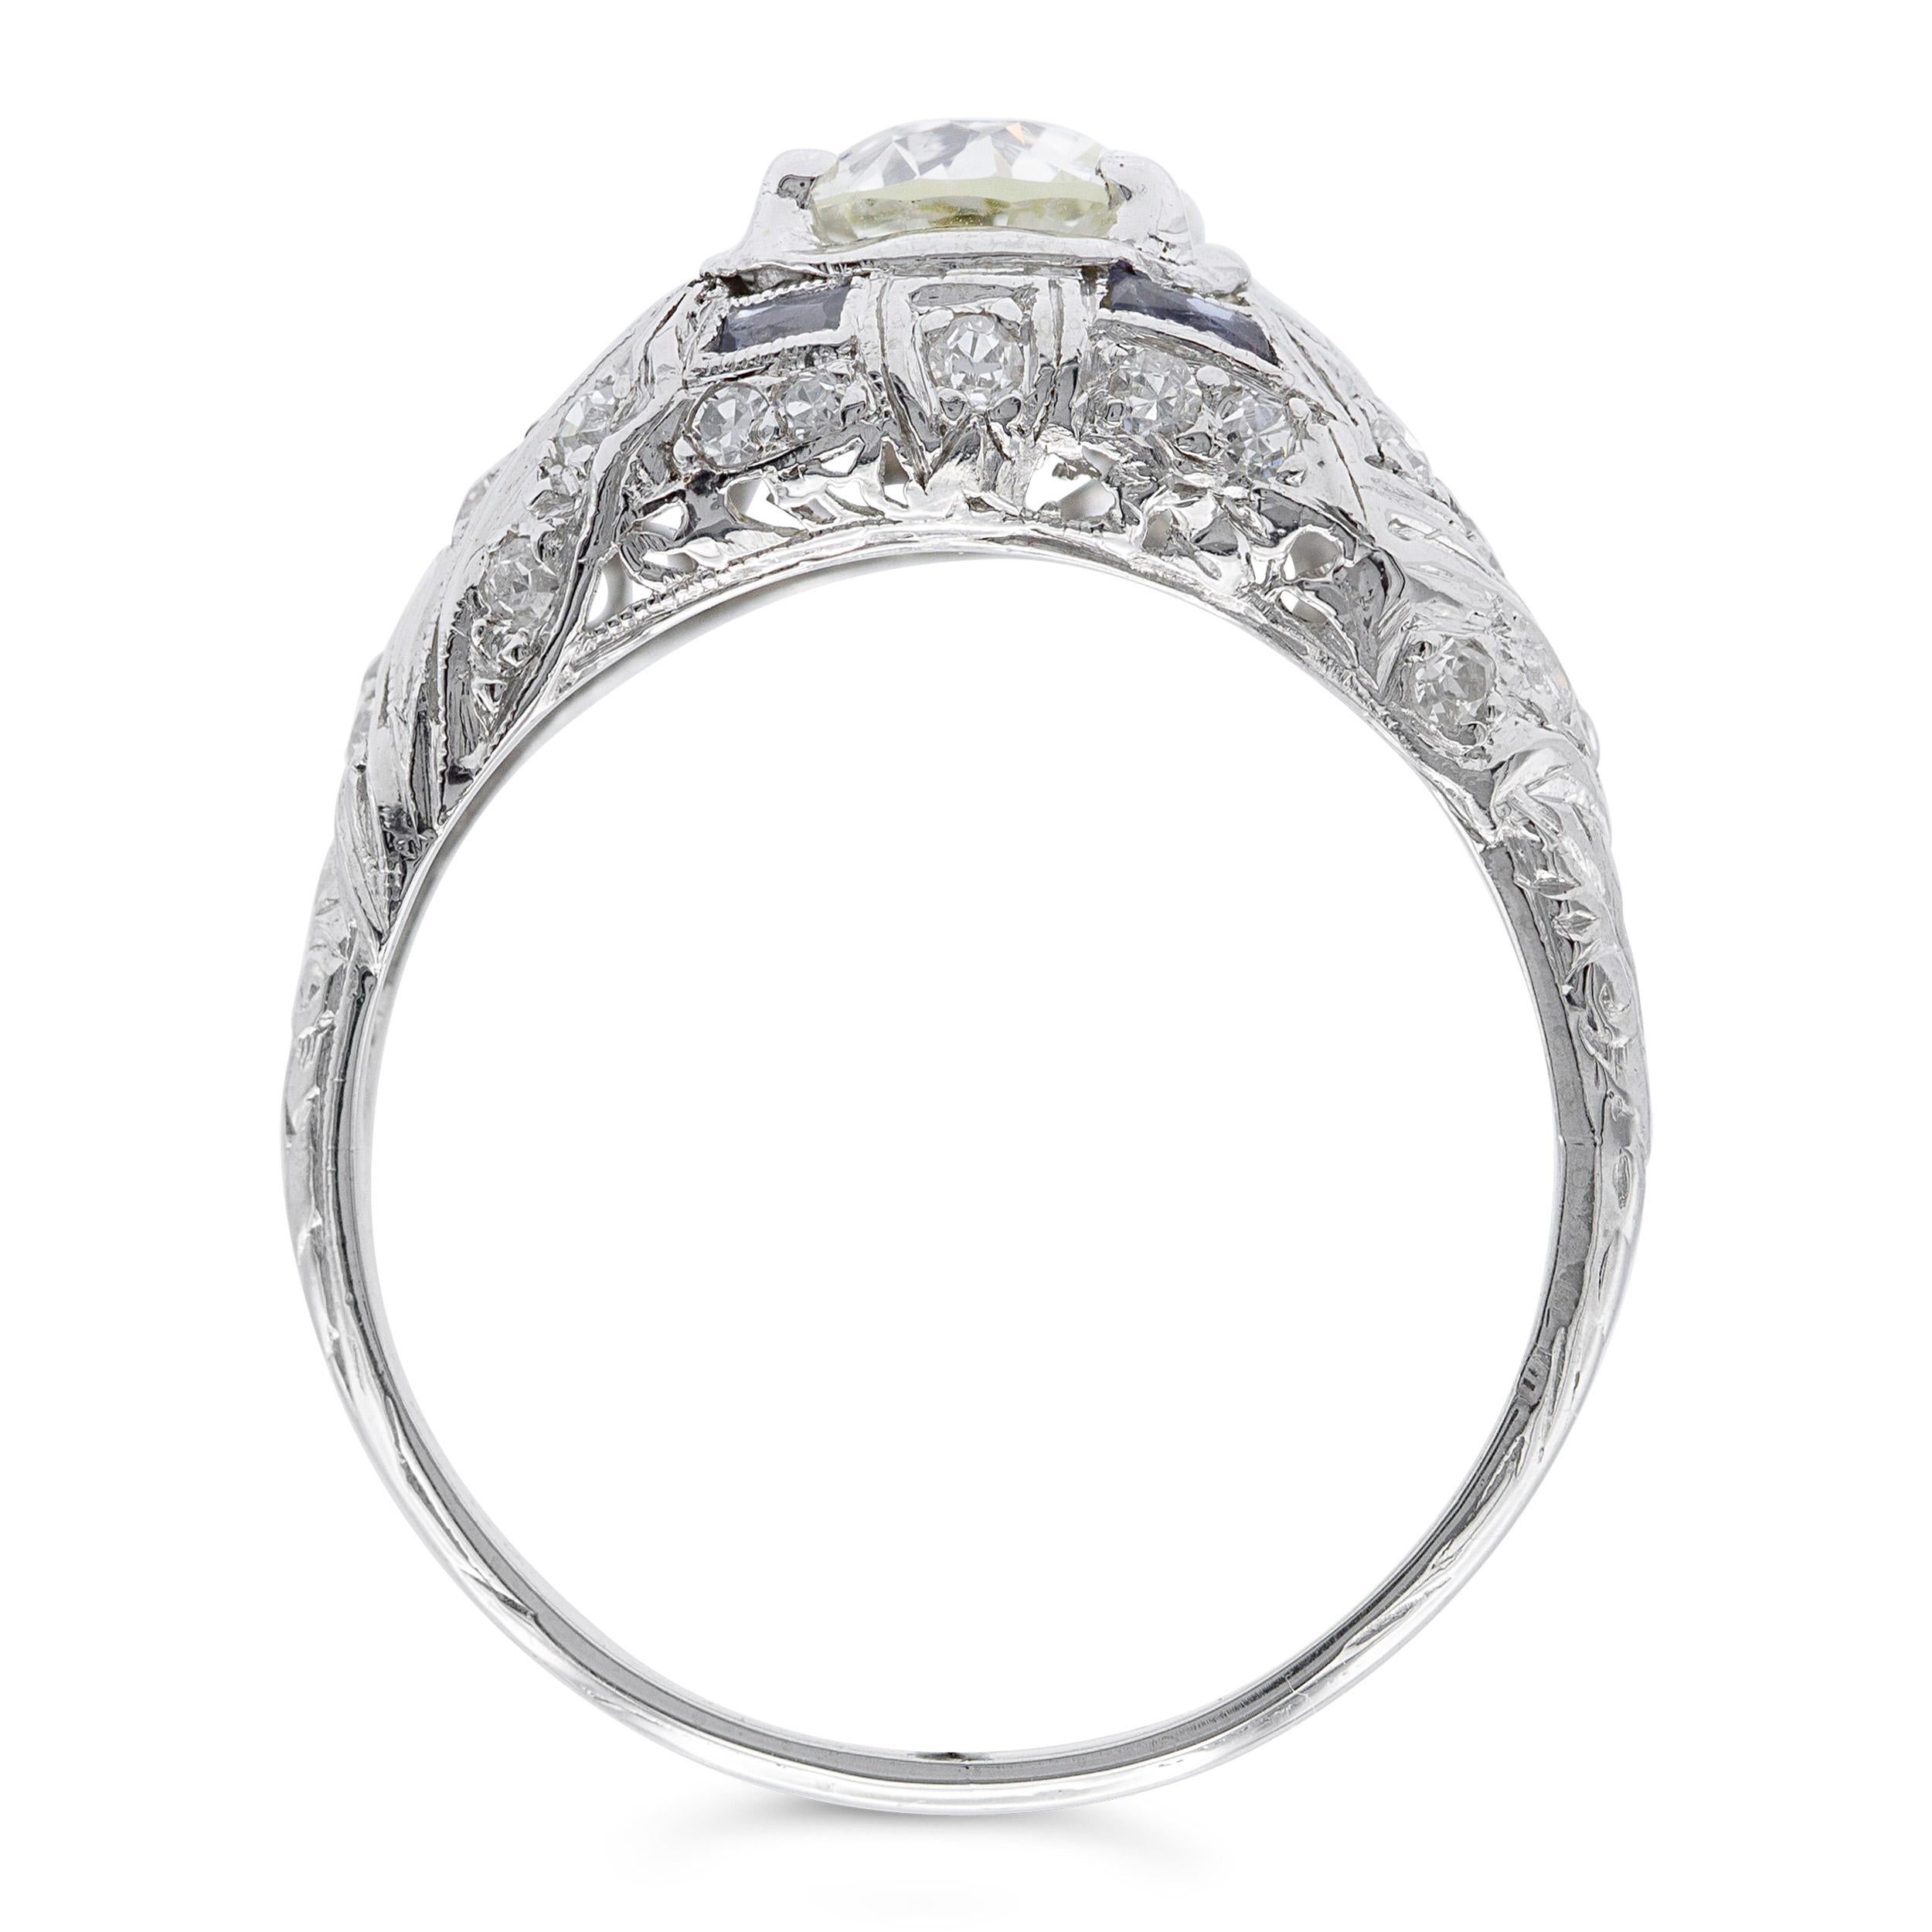 Art Deco GIA Certified 1.02 Ct. Diamond Engagement Ring M SI1 in Platinum In Good Condition For Sale In New York, NY